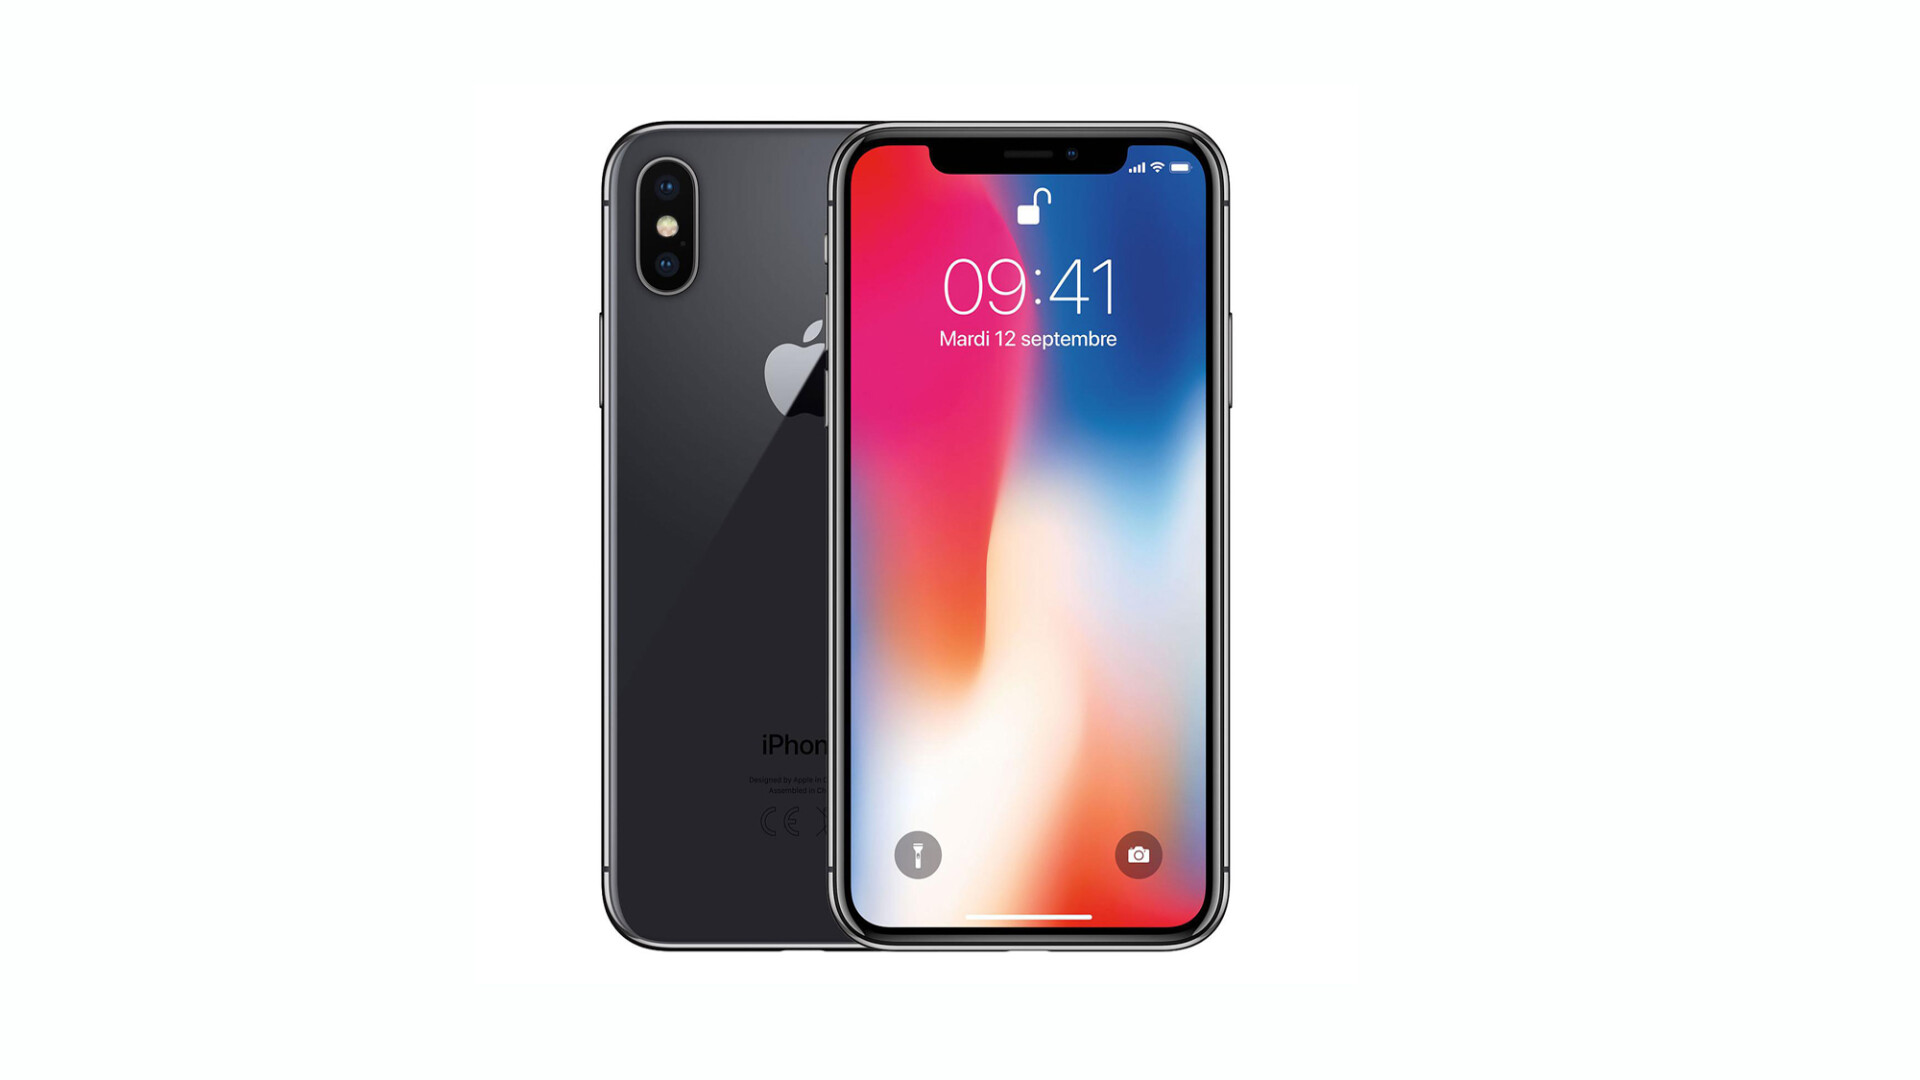 IPhone X 64GB - Space Gray 